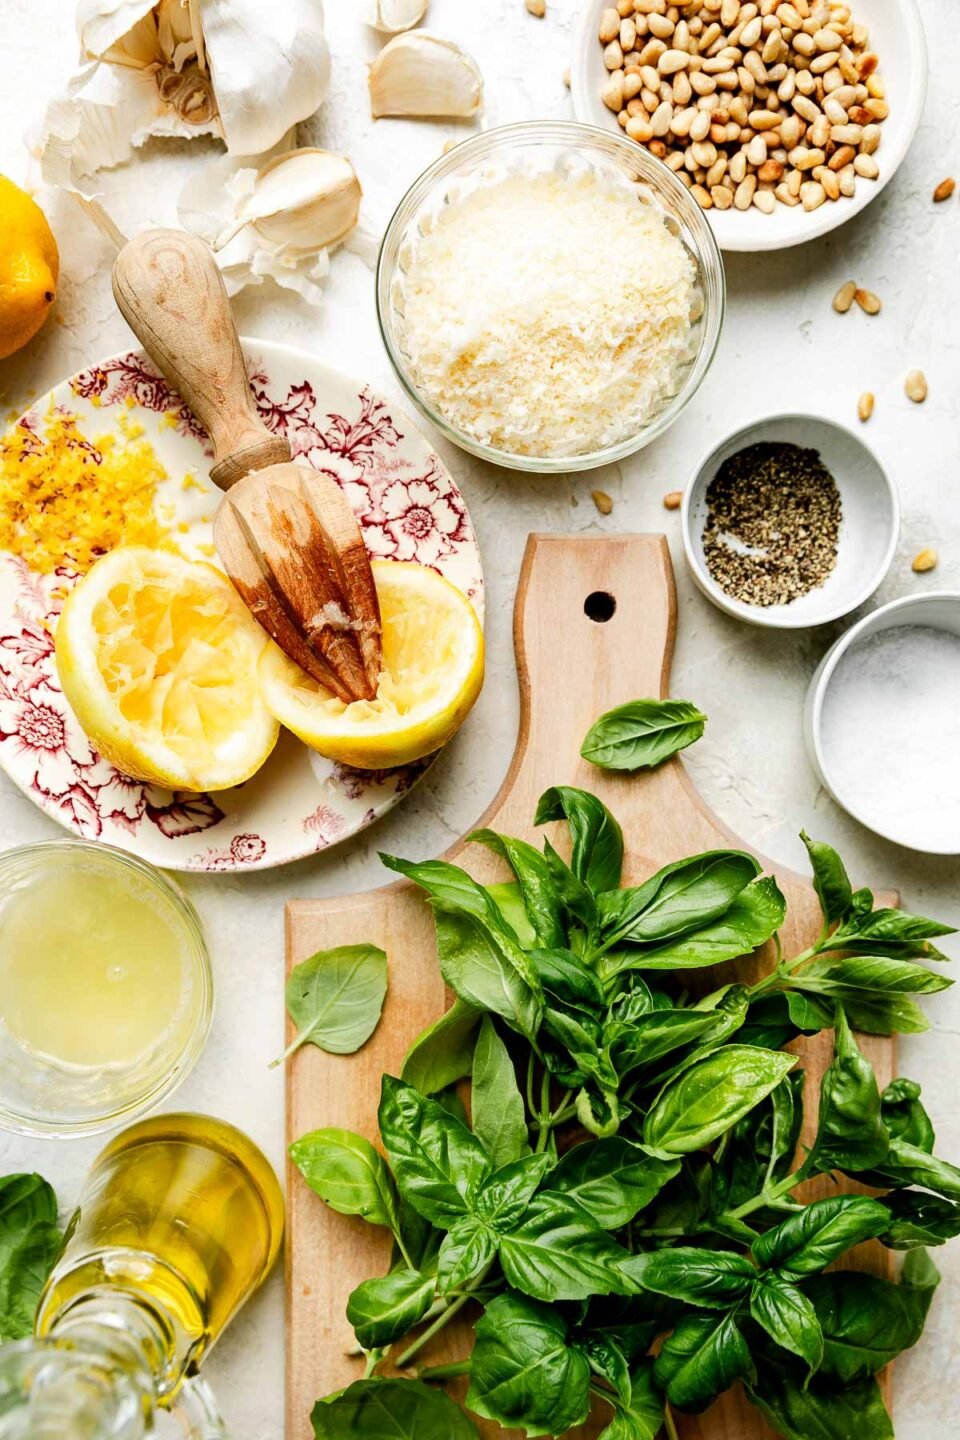 An overhead shot of ingredients displayed on a white textured surface on a cutting board and a variety of dishes: basil, parmesan, lemons, olive oil, pine nuts, garlic, salt and pepper.